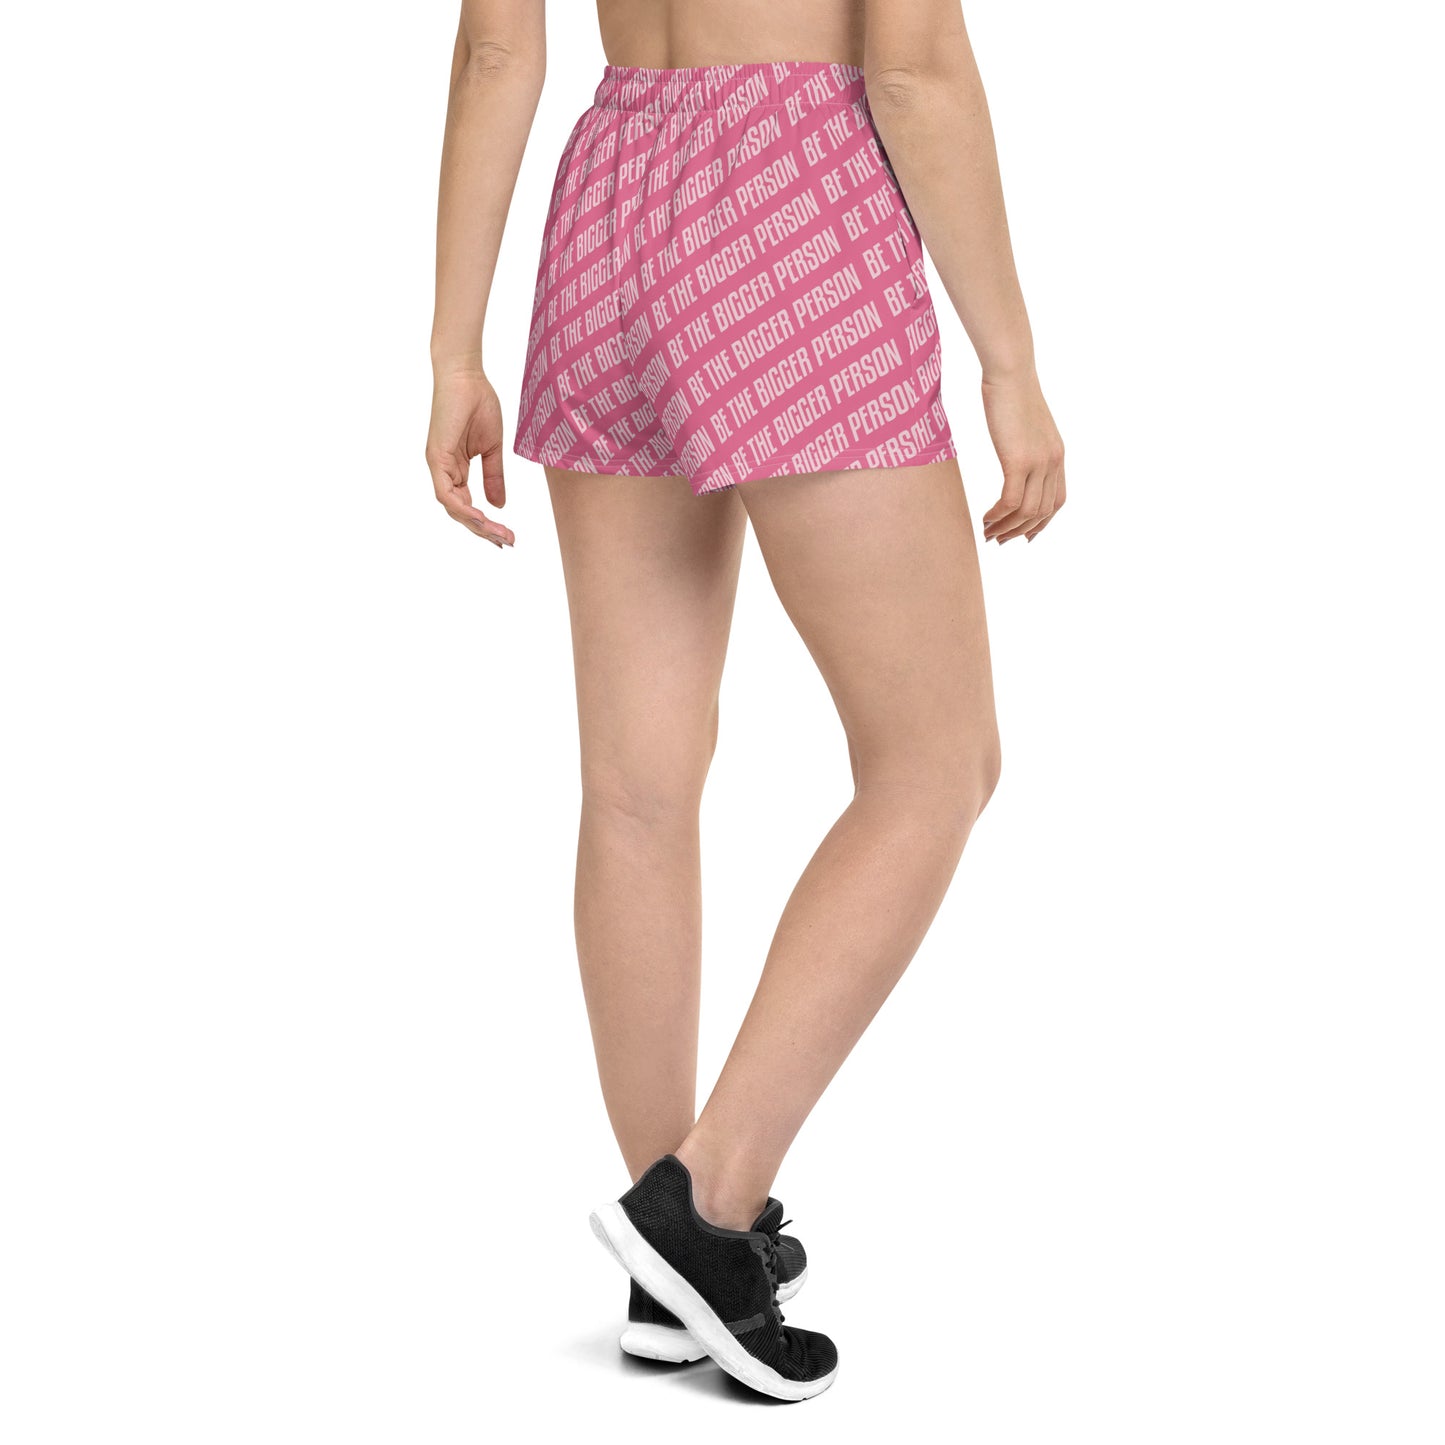 BLIND LOVE - Women’s Recycled Athletic Shorts